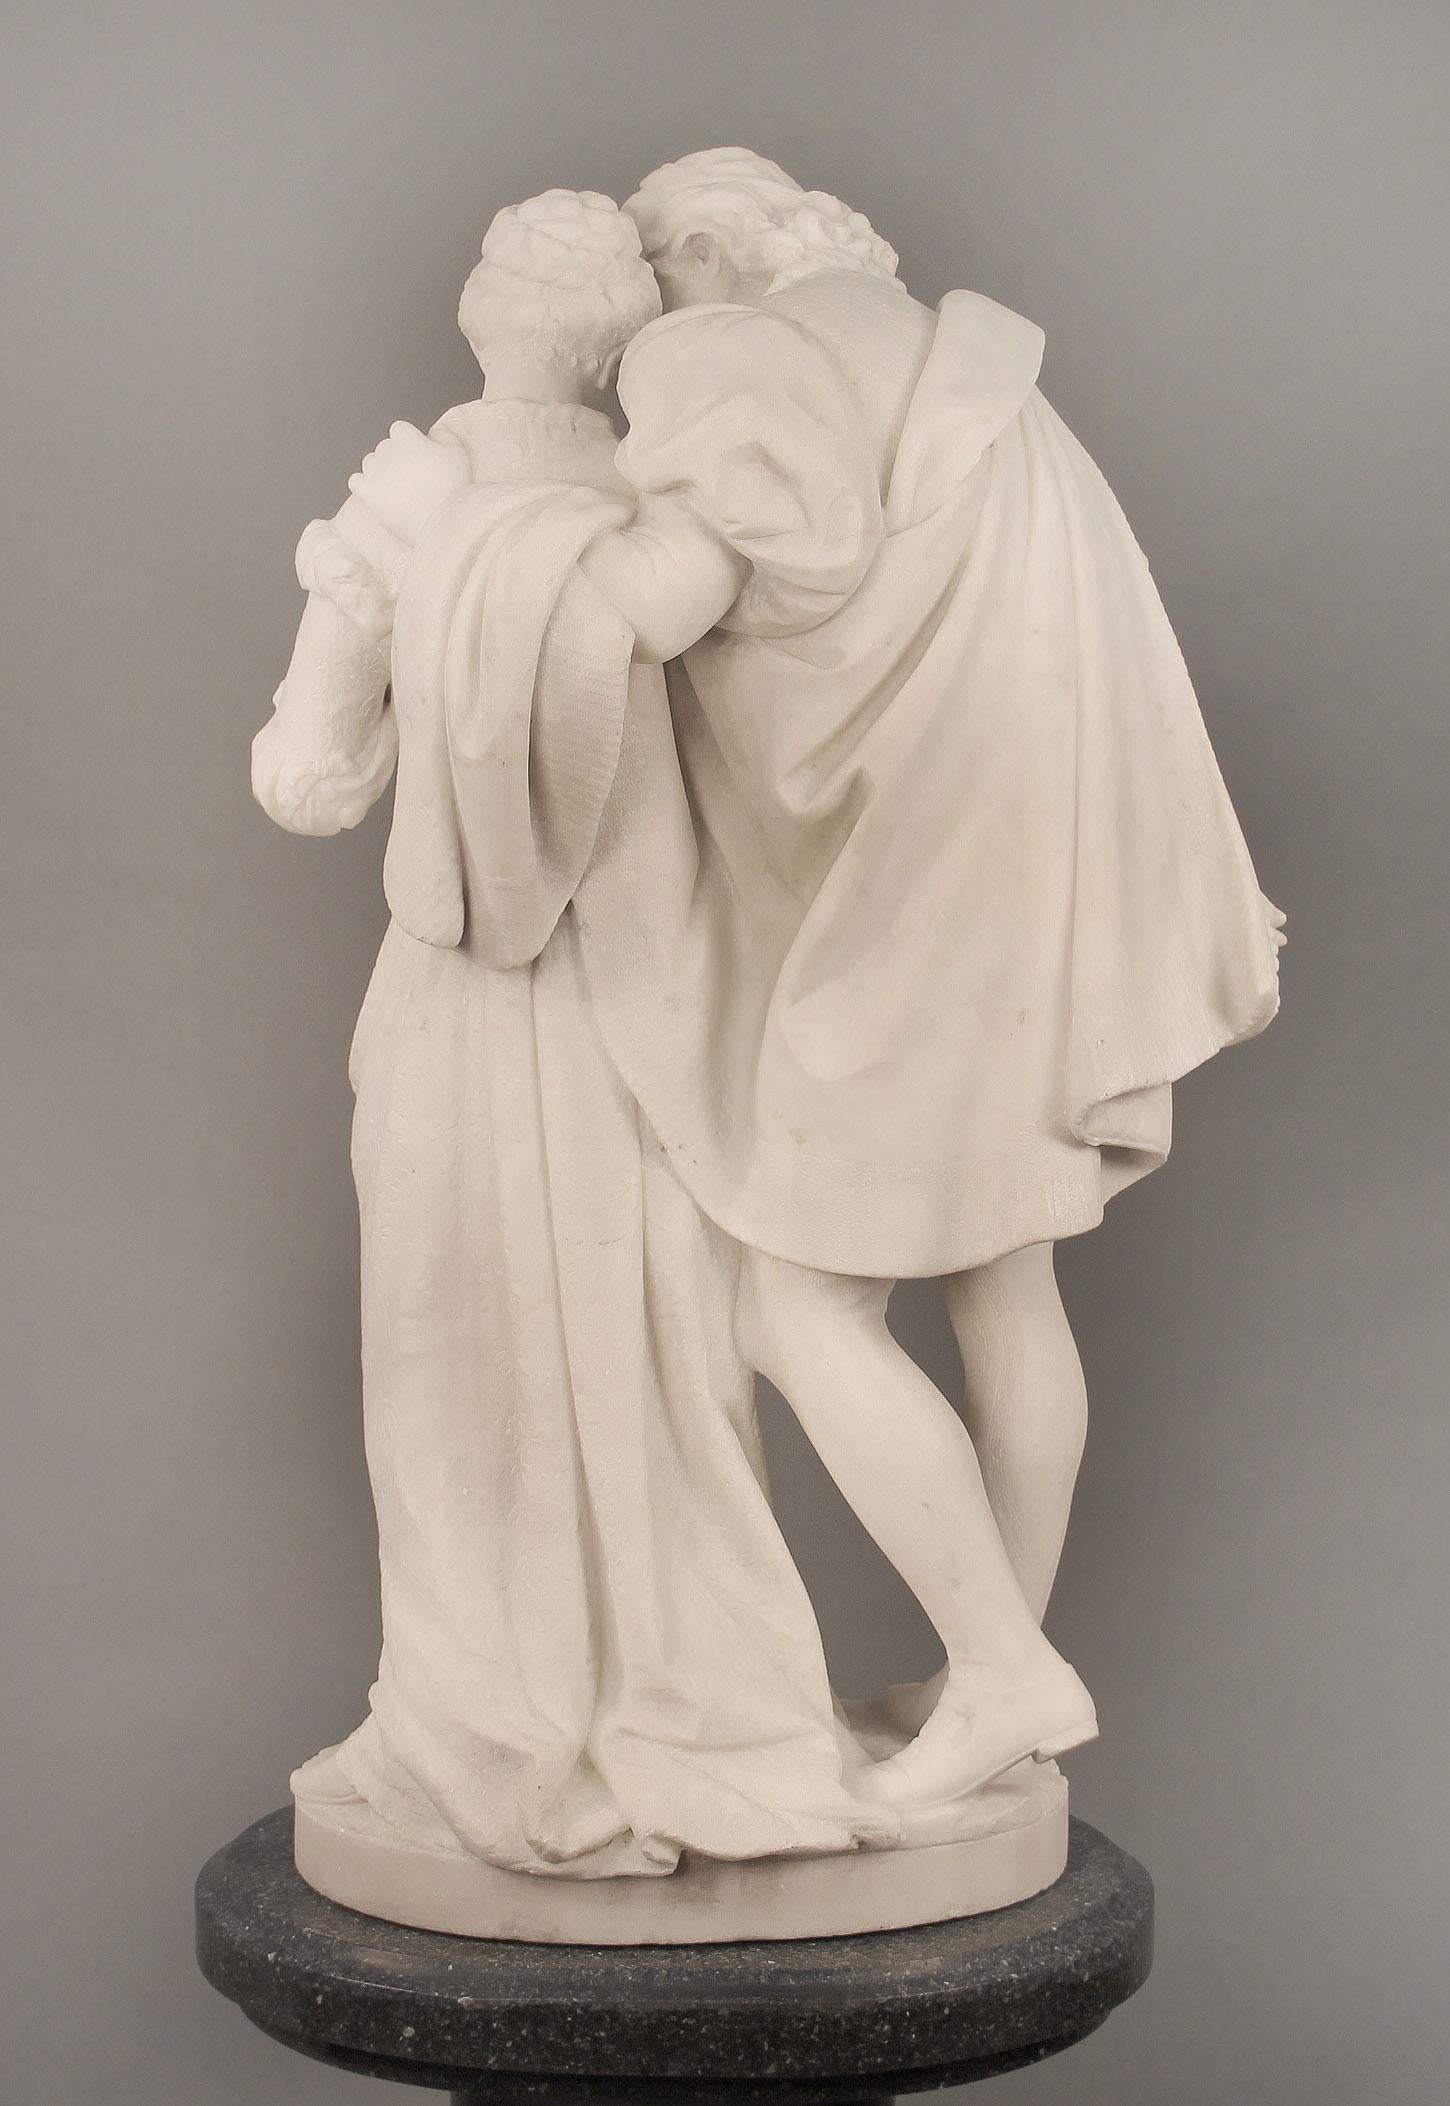 19th Century Italian White Carrara Marble, “Paolo and Francesca” by Romanelli For Sale 2